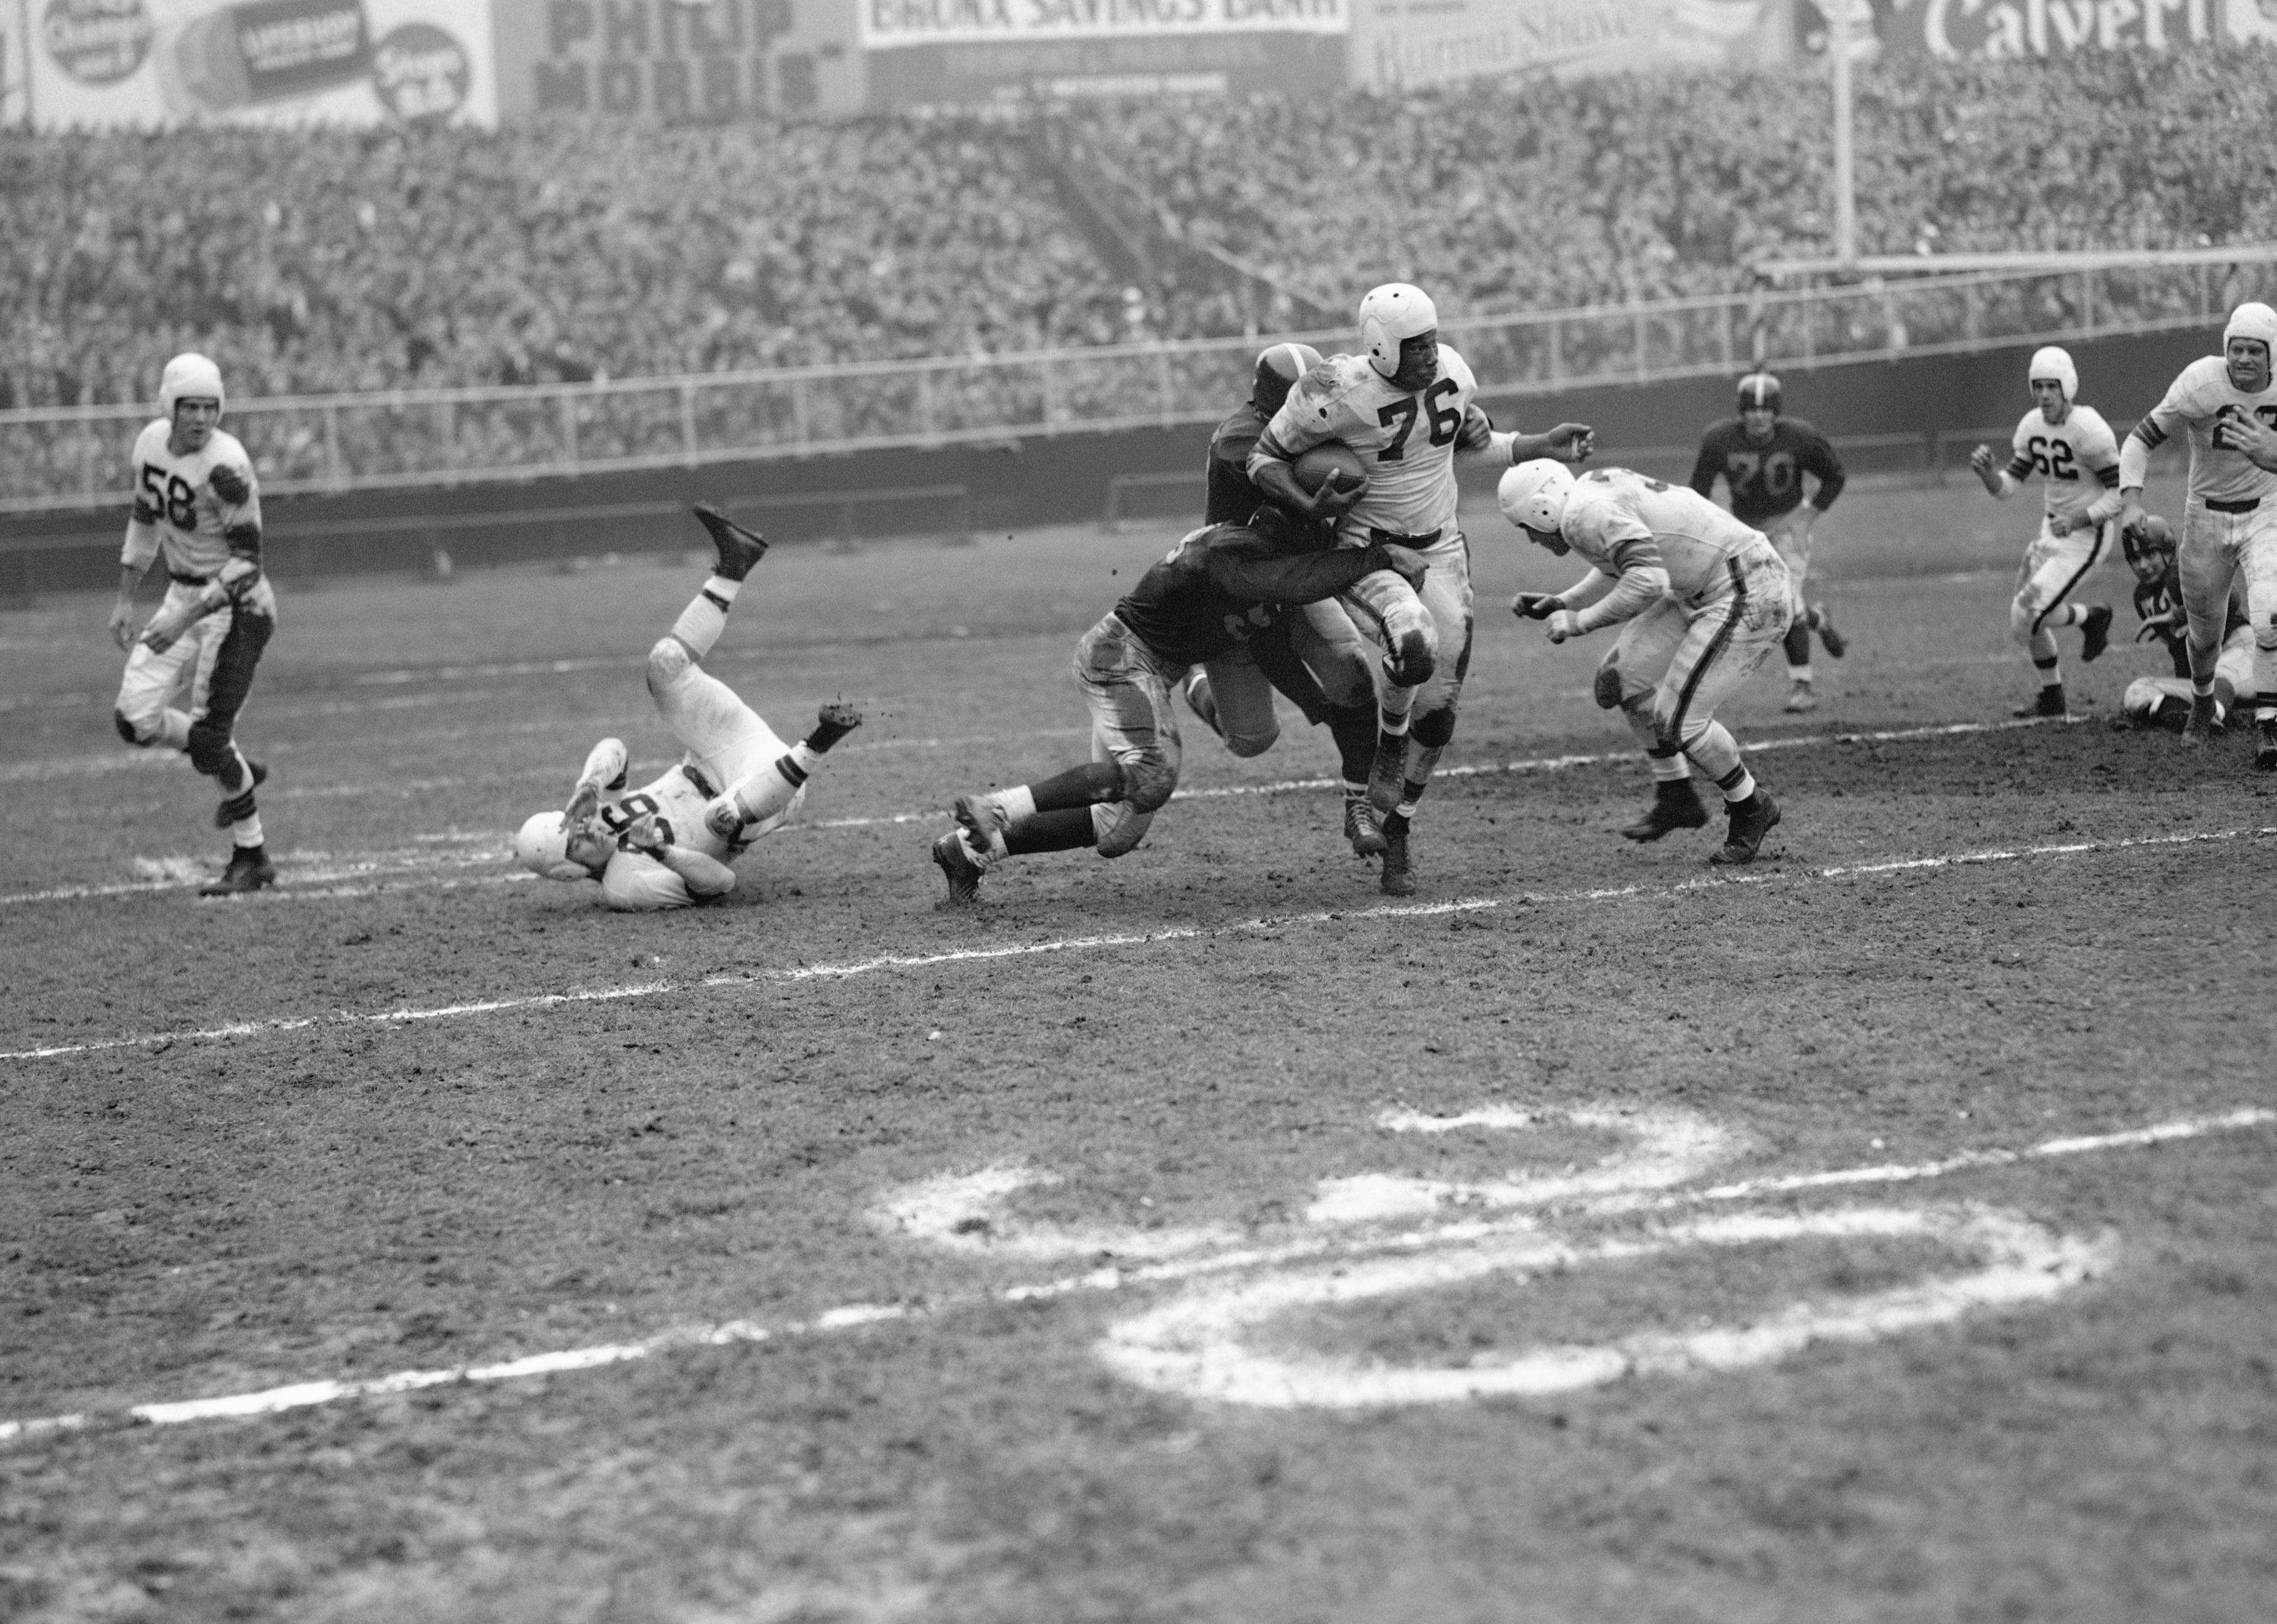 Marion Motley, Cleveland Browns Fullback, is tackled.